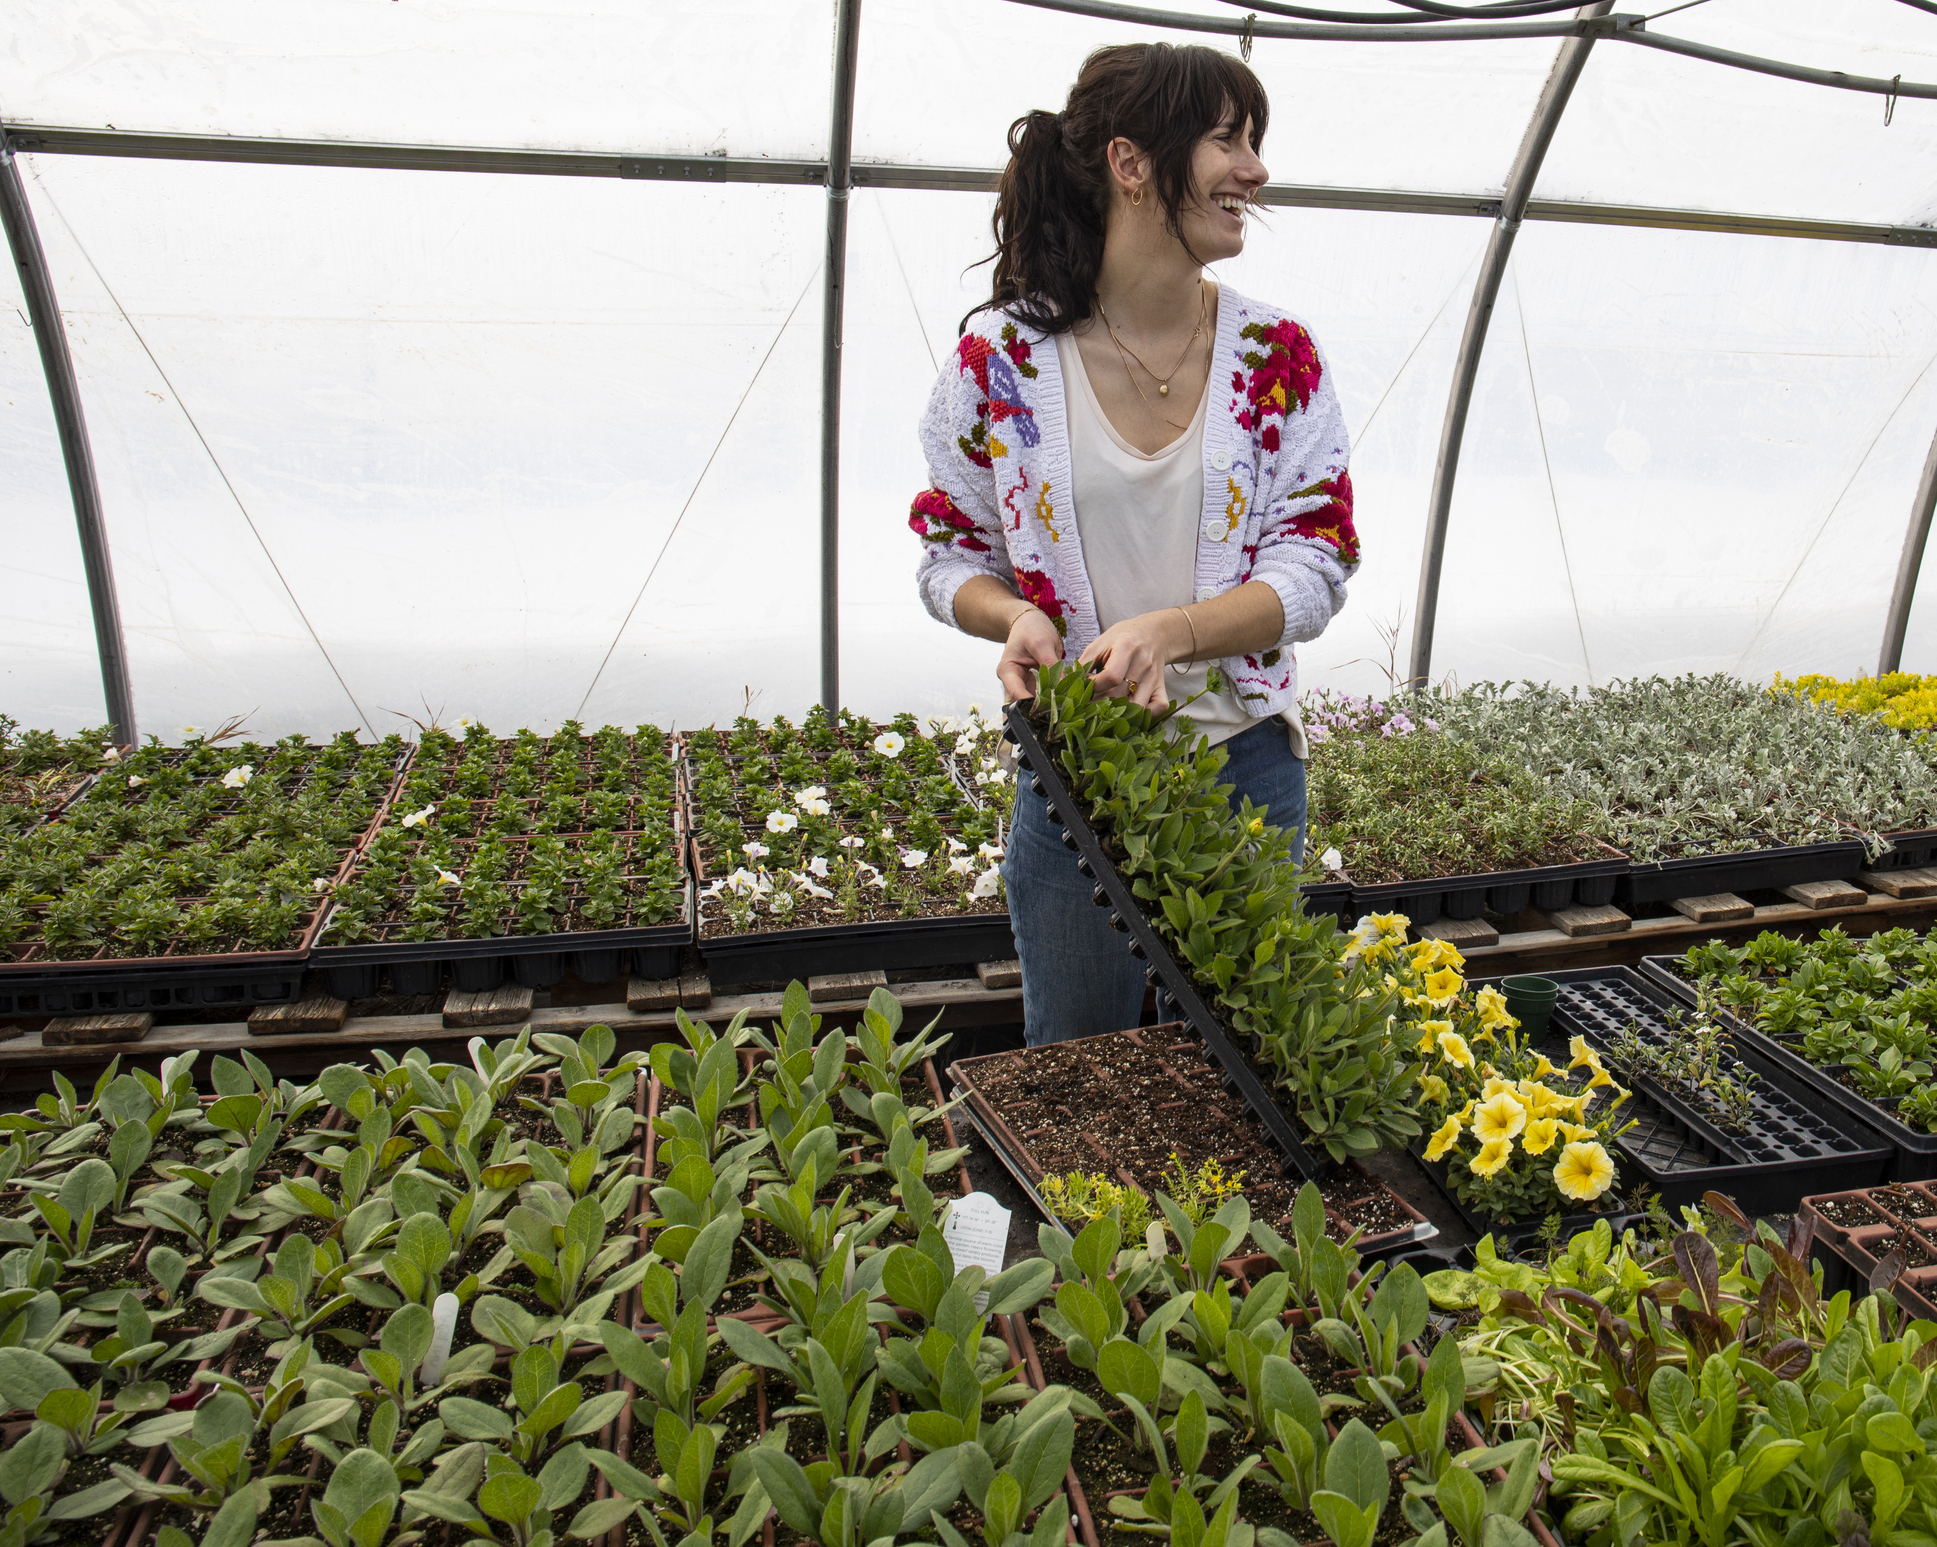 A woman tending growing flowers in a greenhouse